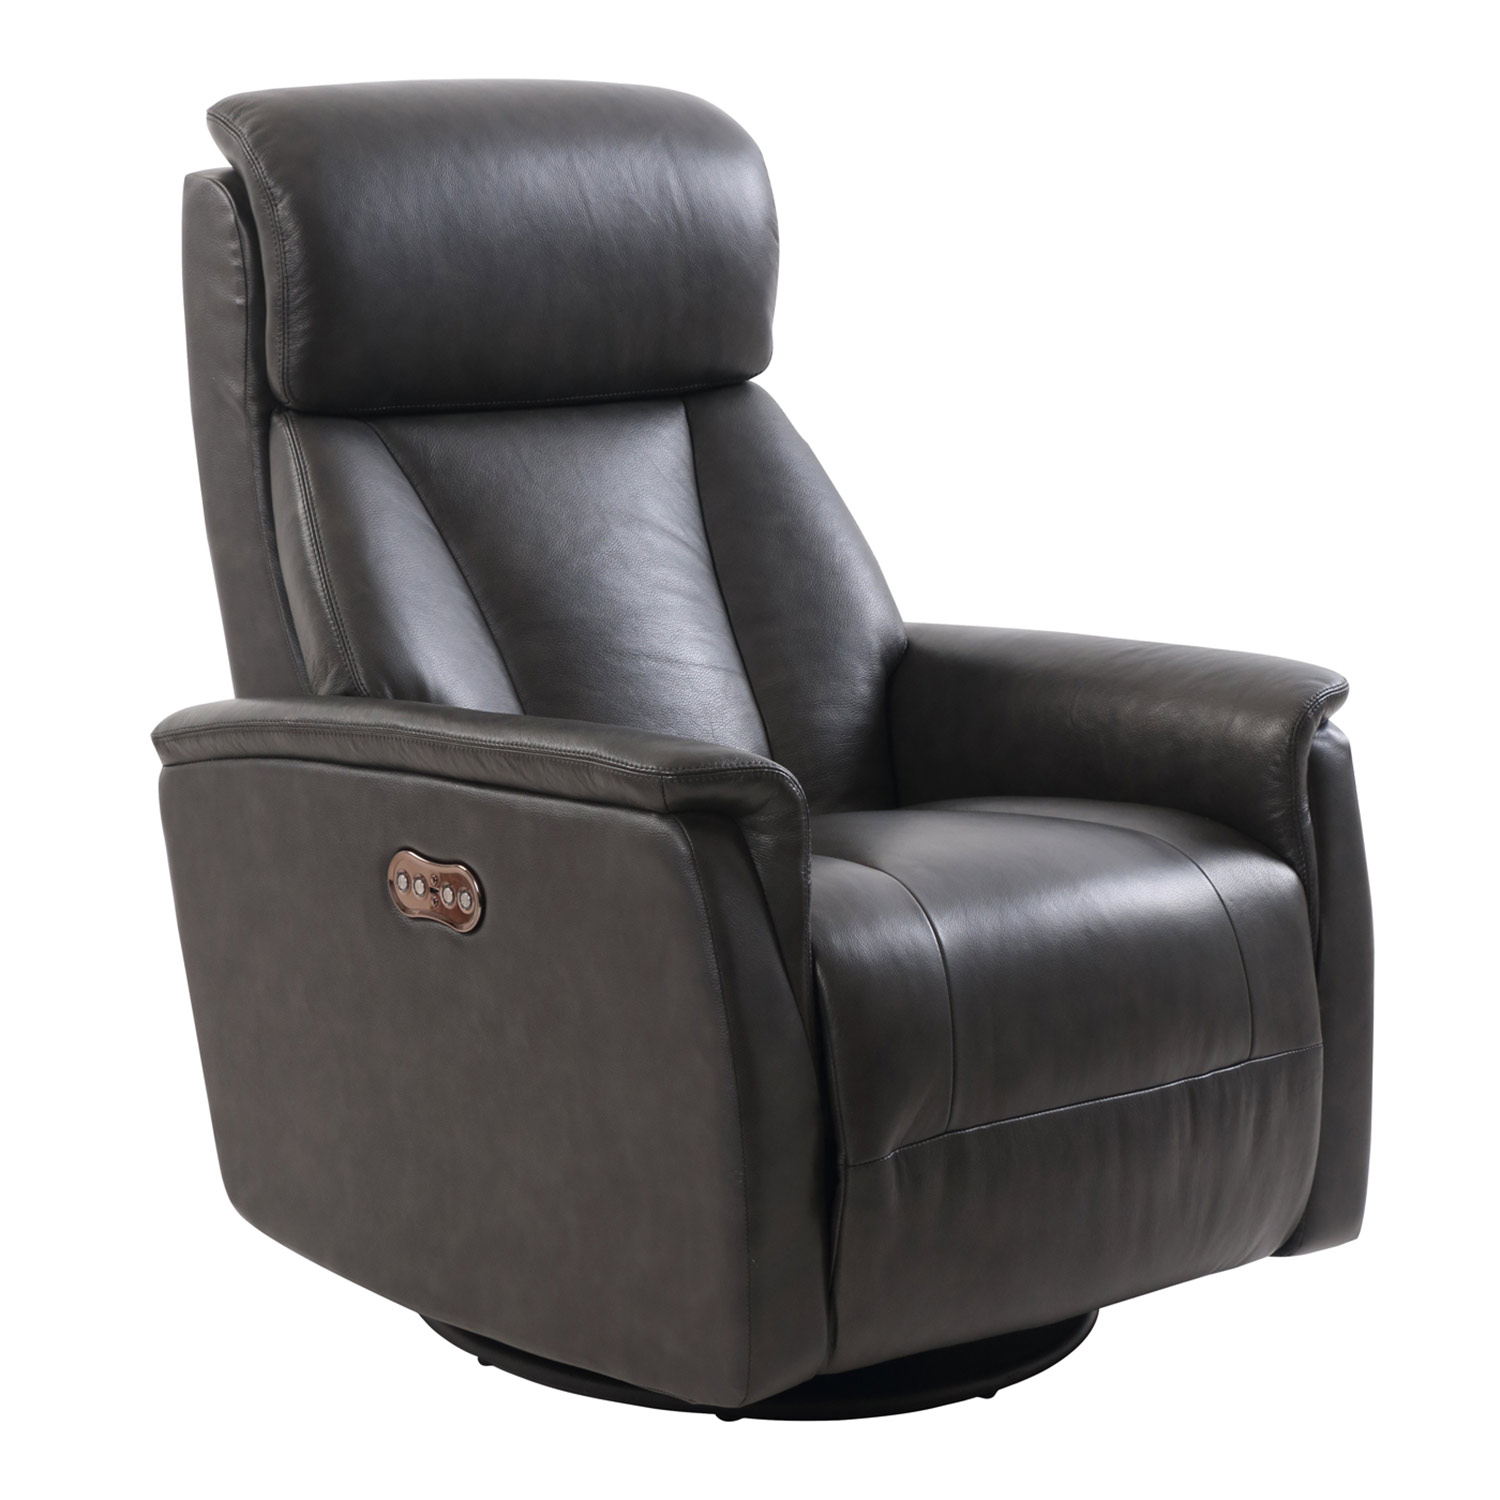 Barcalounger Powell Swivel Glider Recliner Chair with Power Head Rest - Chelsea Graphite/Leather Match